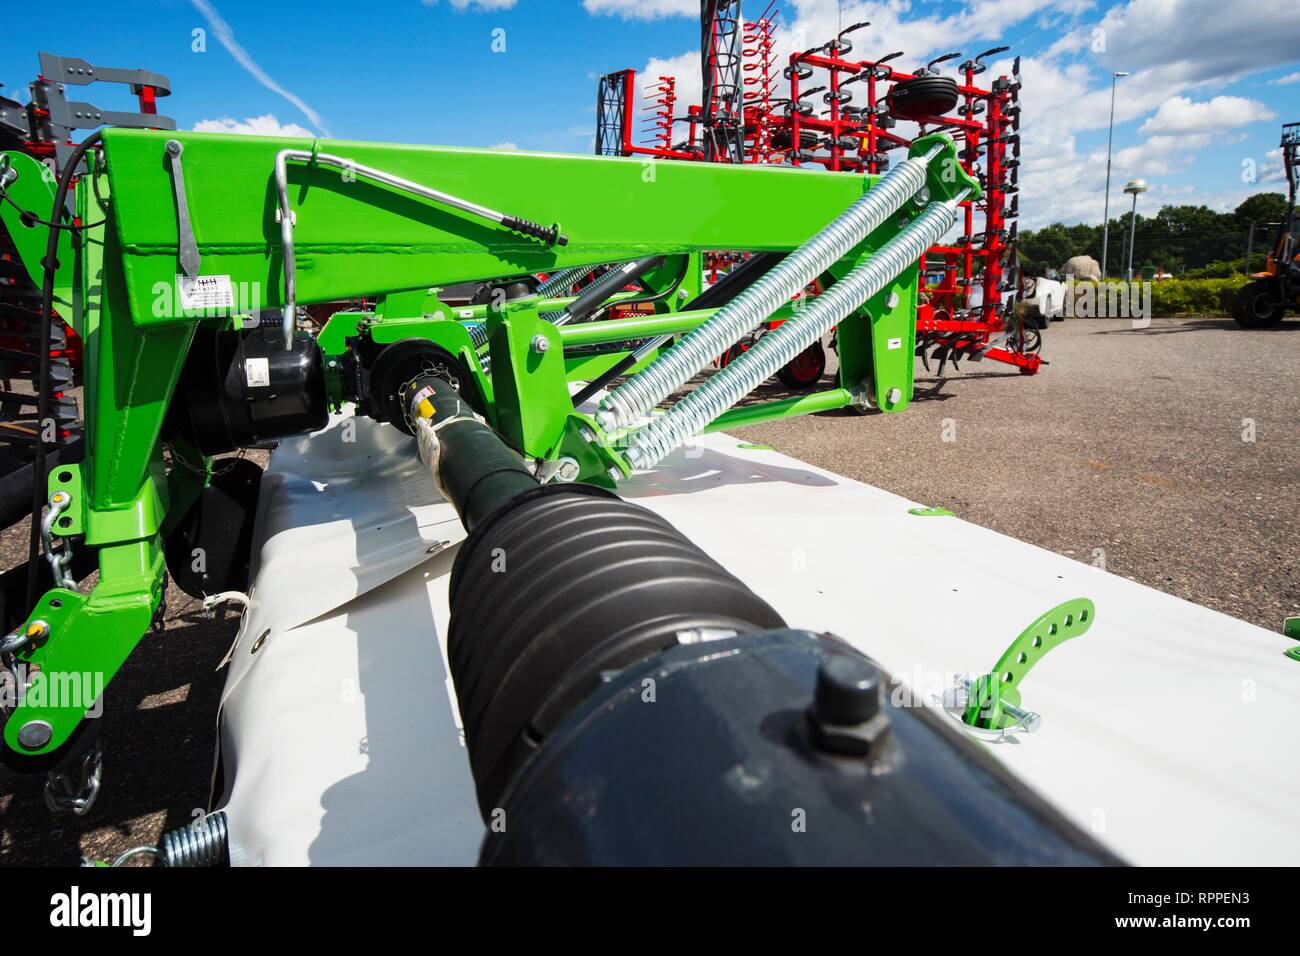 Hydraukic systems on an industrial mower coupled to a tractor. Stock Photo